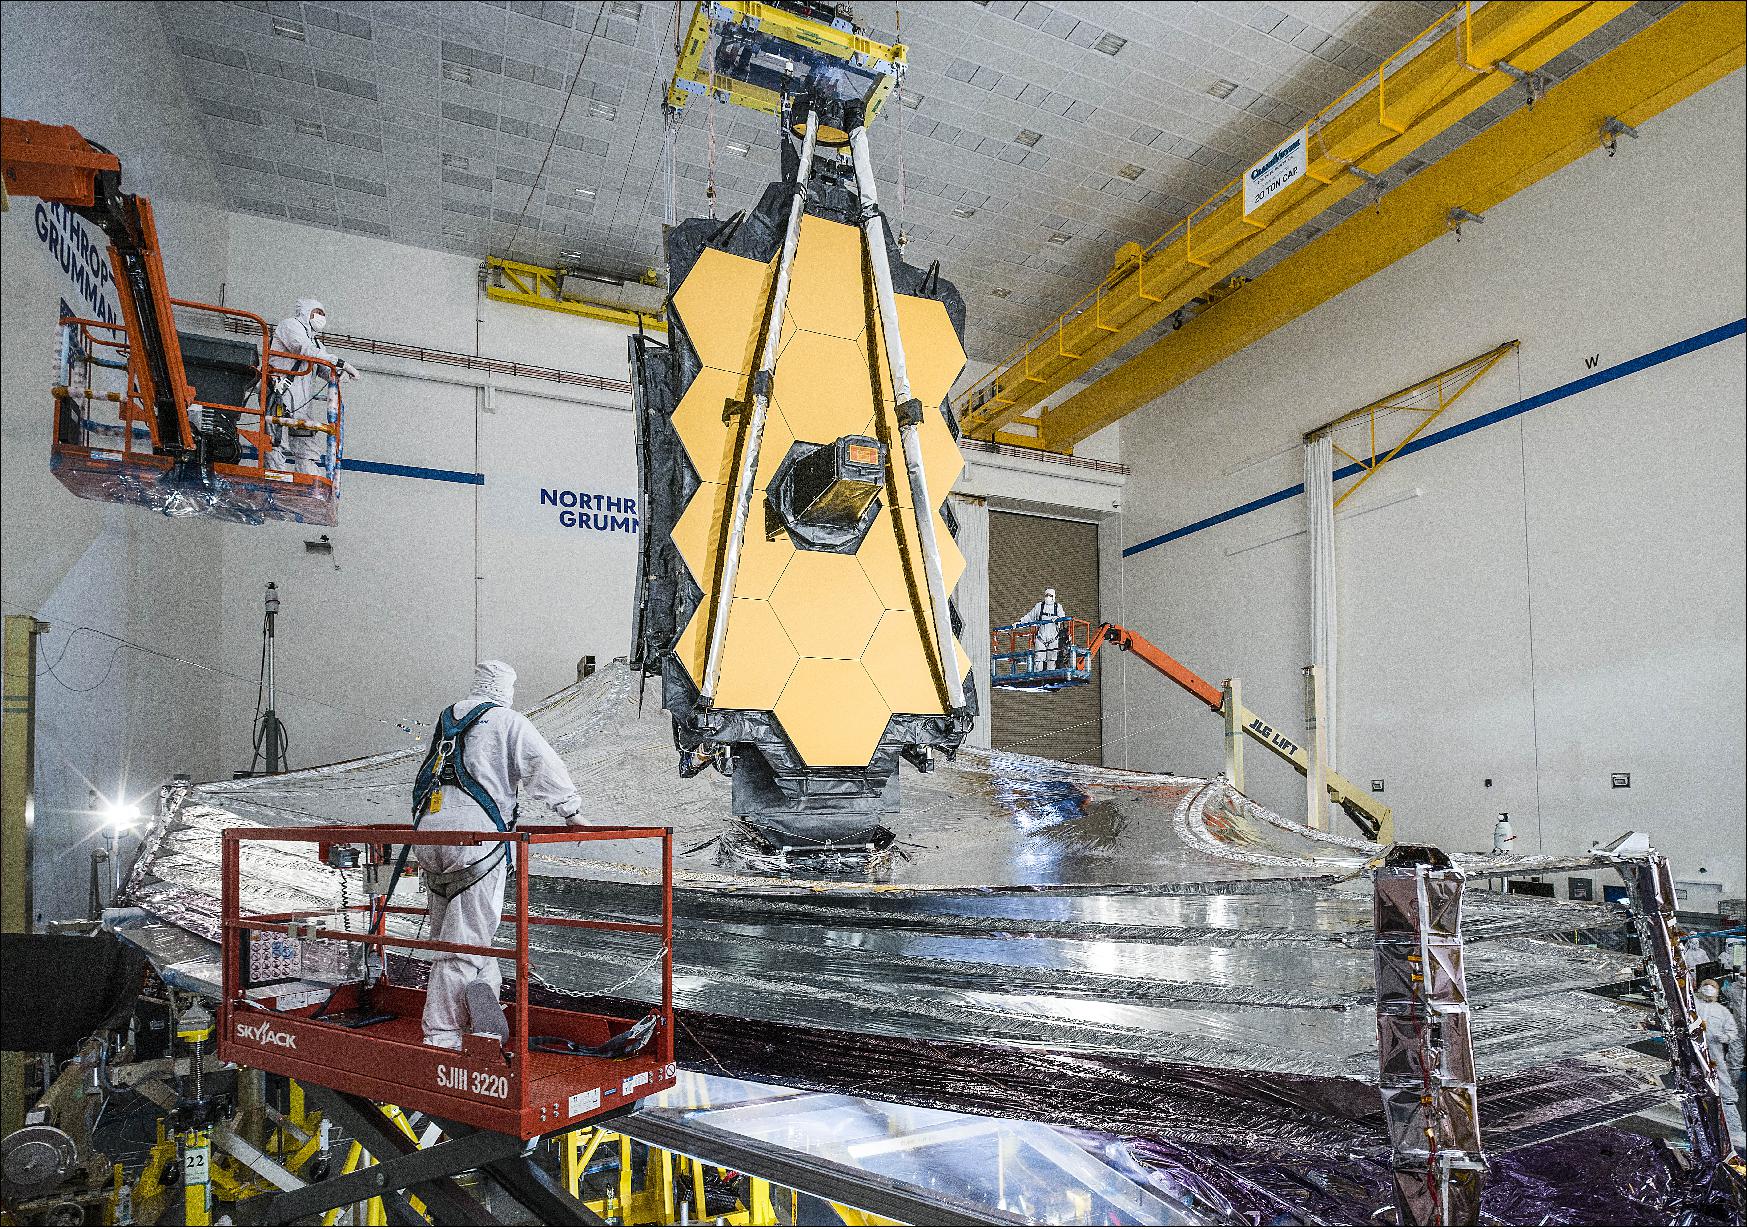 Figure 27: The James Webb Space Telescope's final tests are underway with the successful completion of its last sunshield deployment test, which occurred at Northrop Grumman in Redondo Beach, California (image credit: NASA/Chris Gunn)